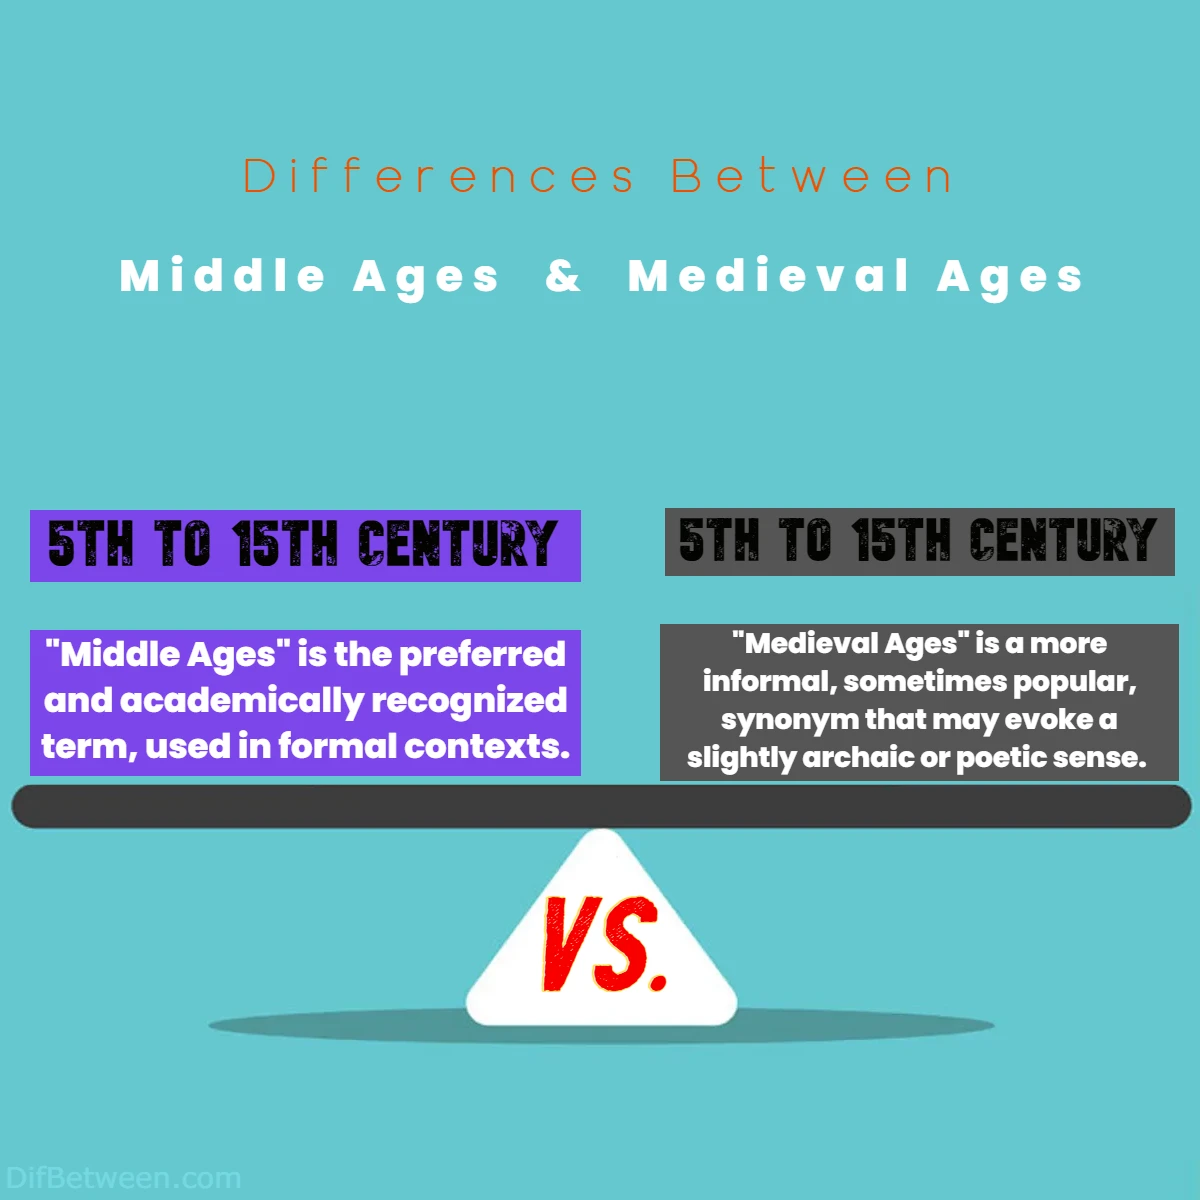 Differences Between Middle Ages vs Medieval Ages